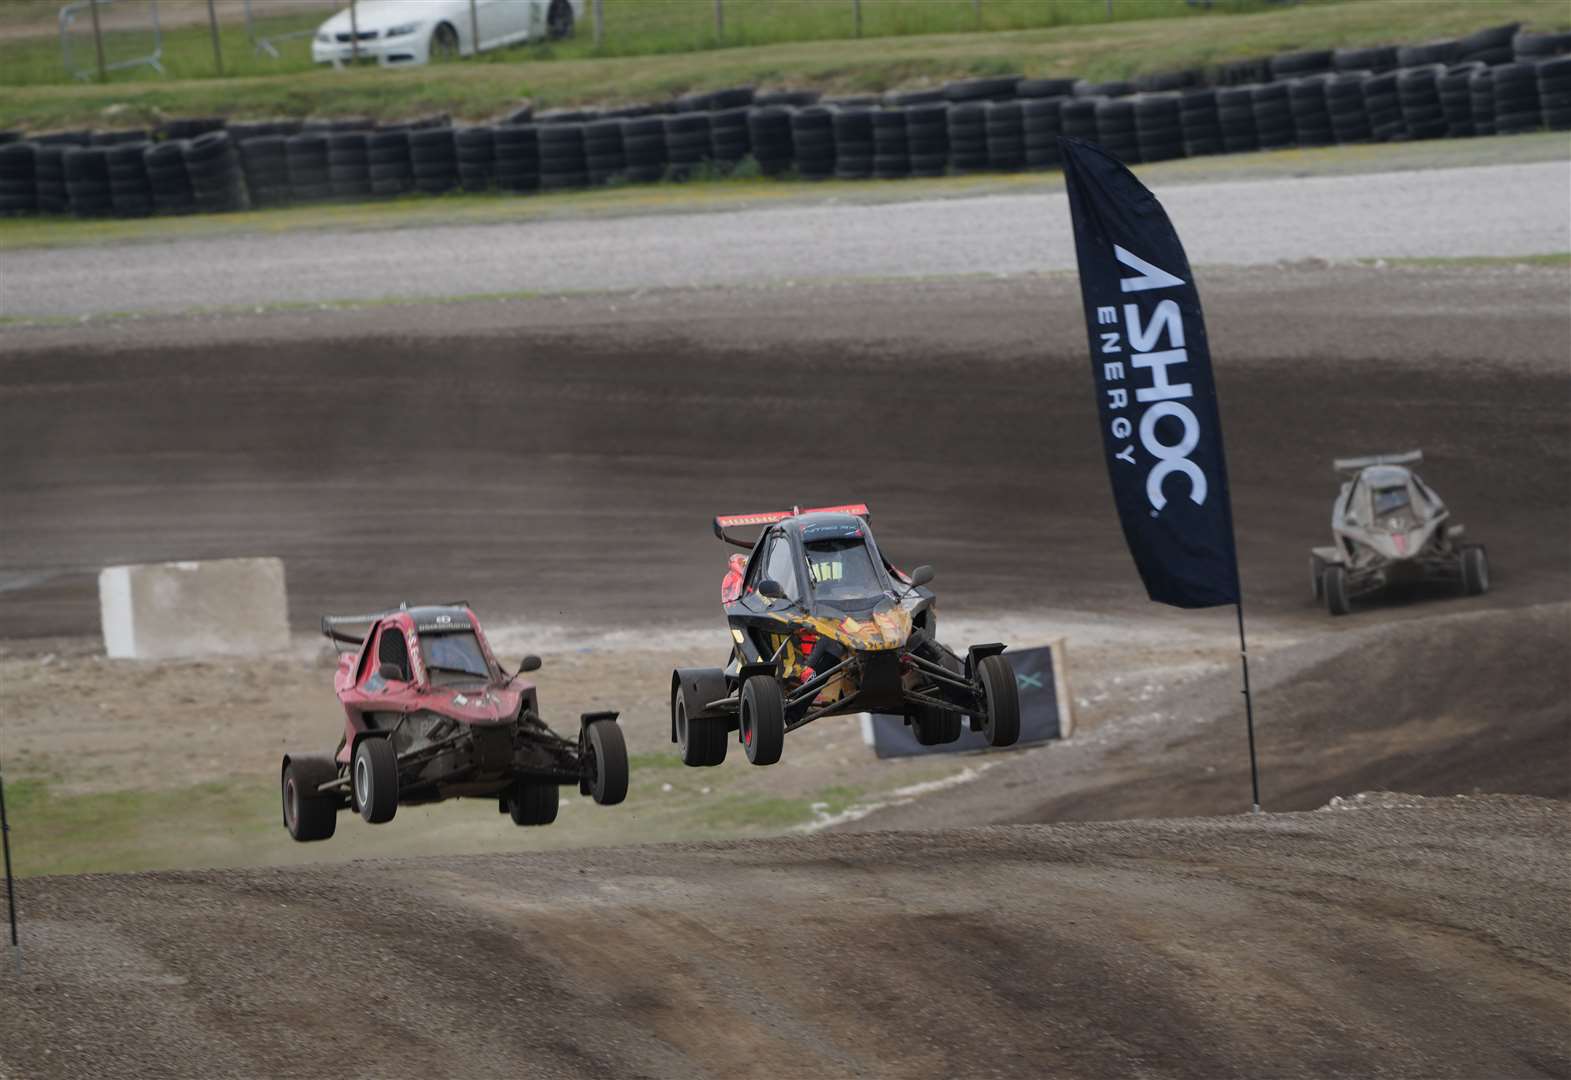 Huge jump and Nascar-style bend to stay at Lydden